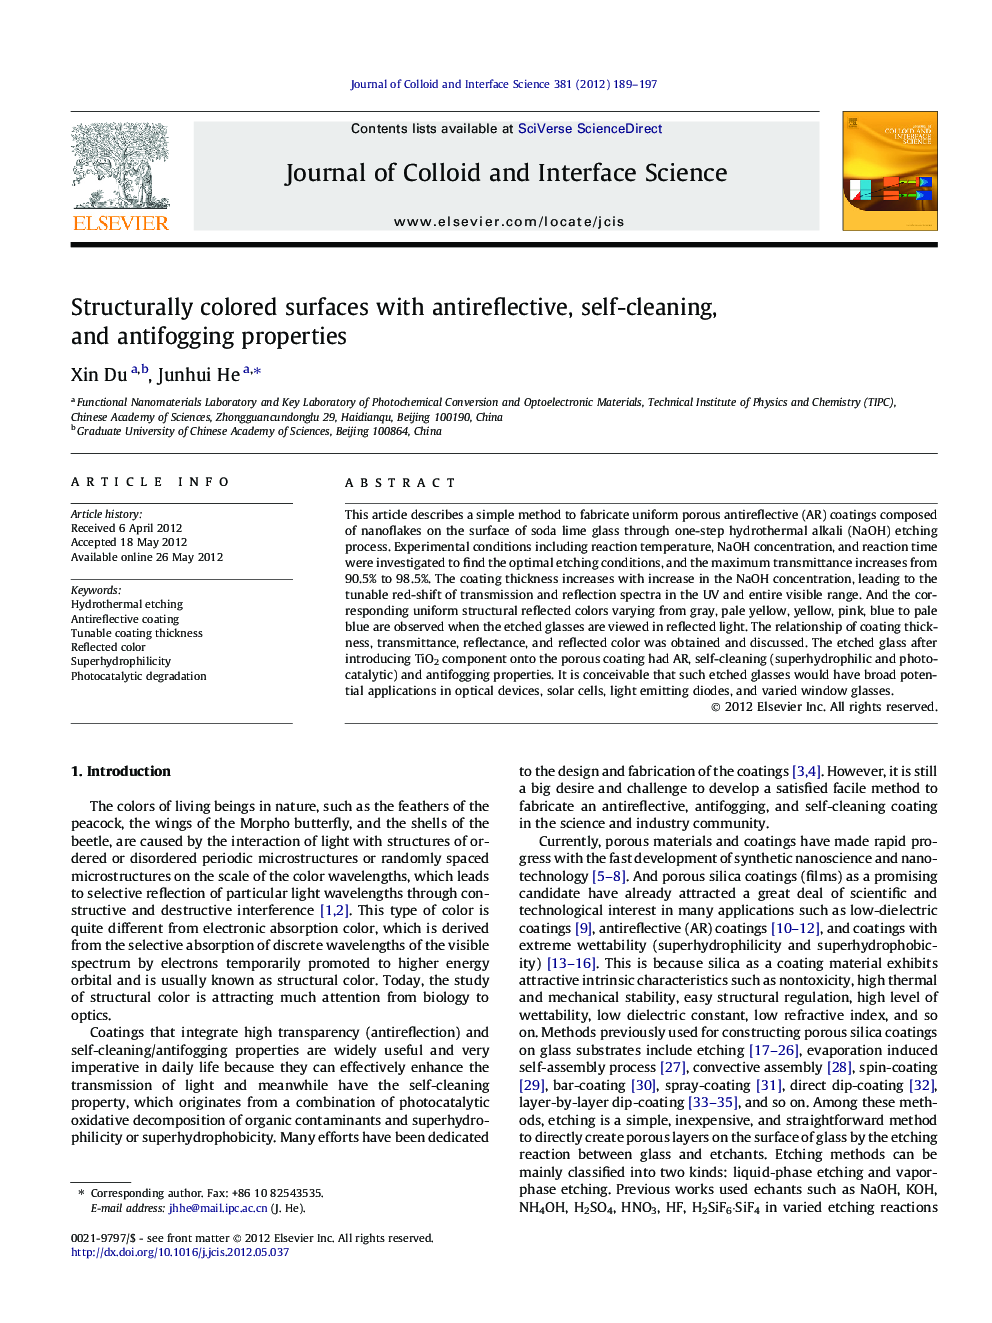 Structurally colored surfaces with antireflective, self-cleaning, and antifogging properties